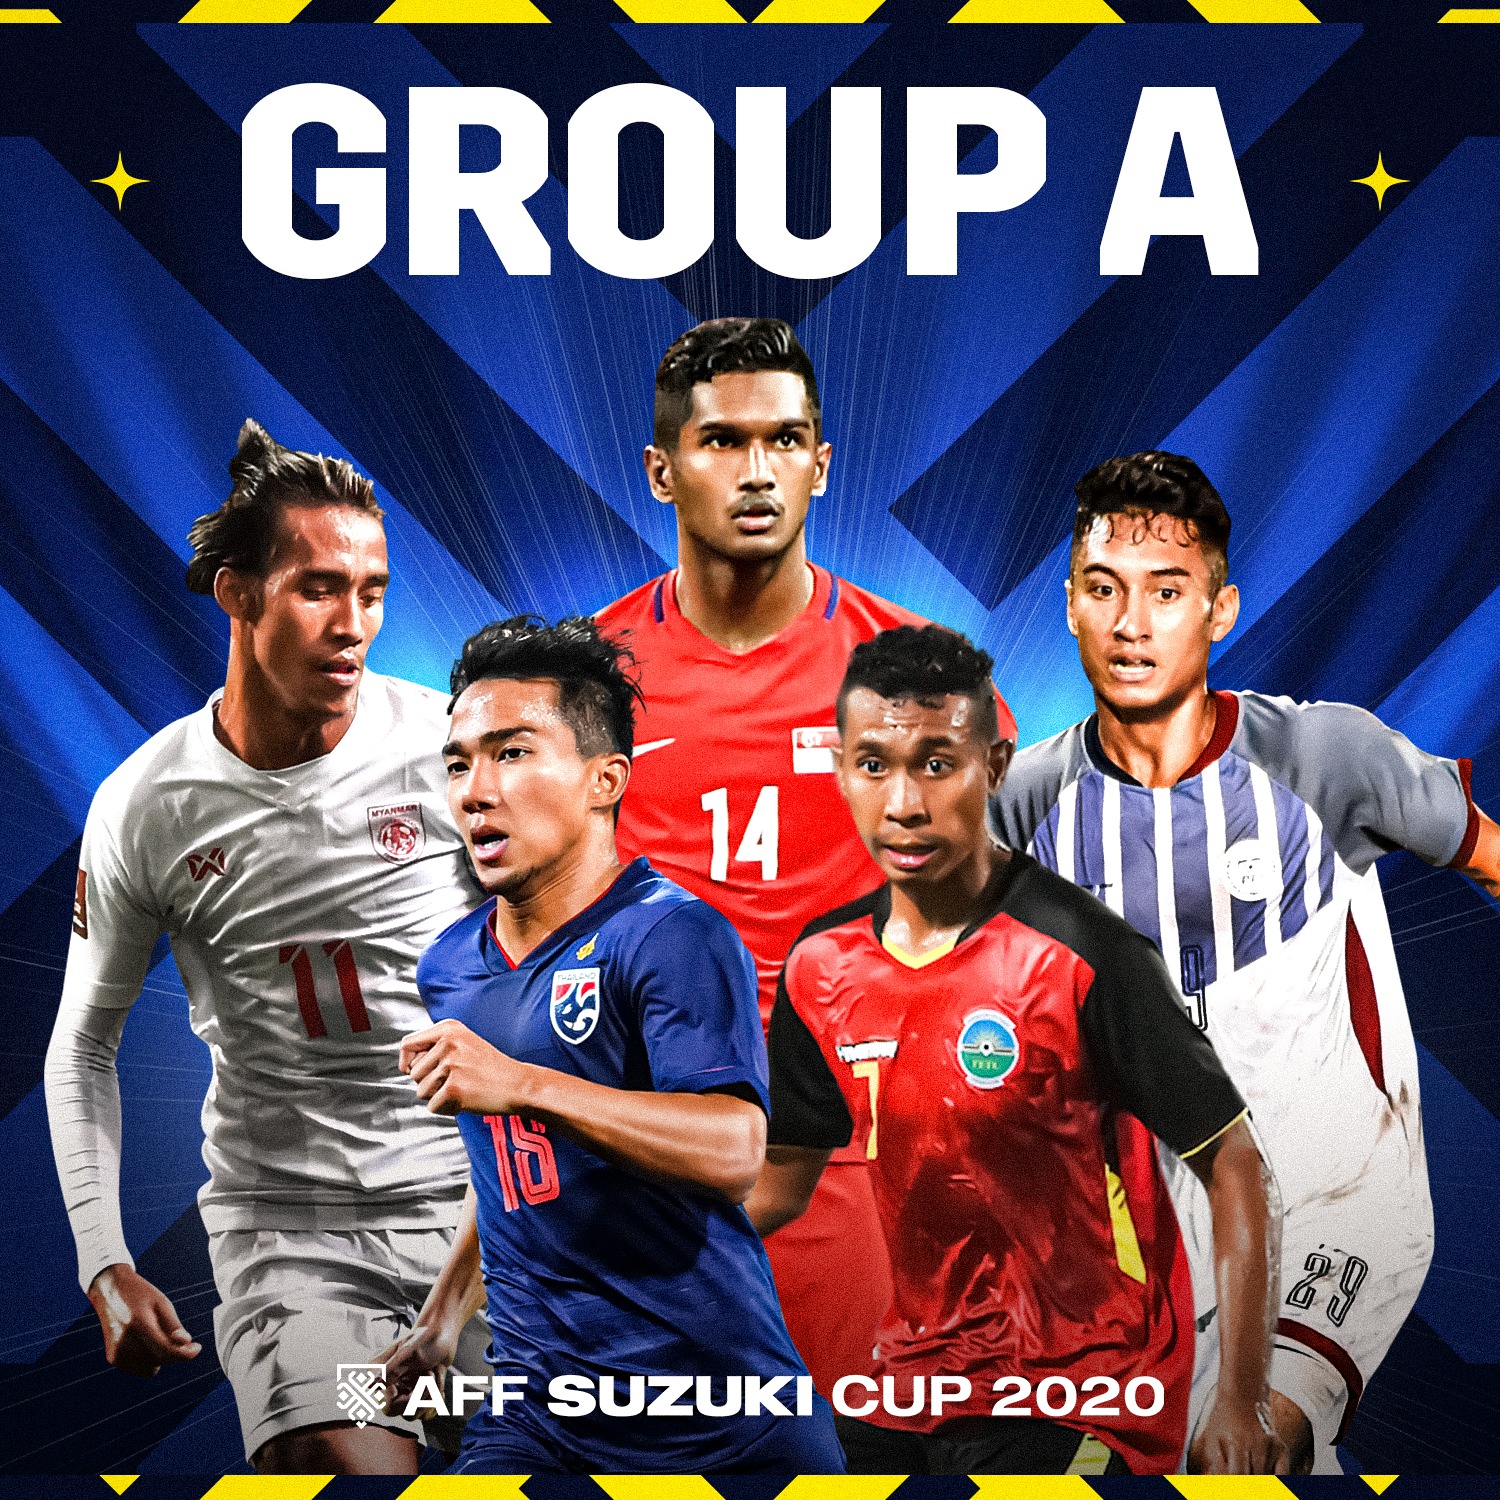 Myanmar and Timor Leste could prove to be detrimental, to the Favourites in Group A of the AFF Suzuki Cup 2020!